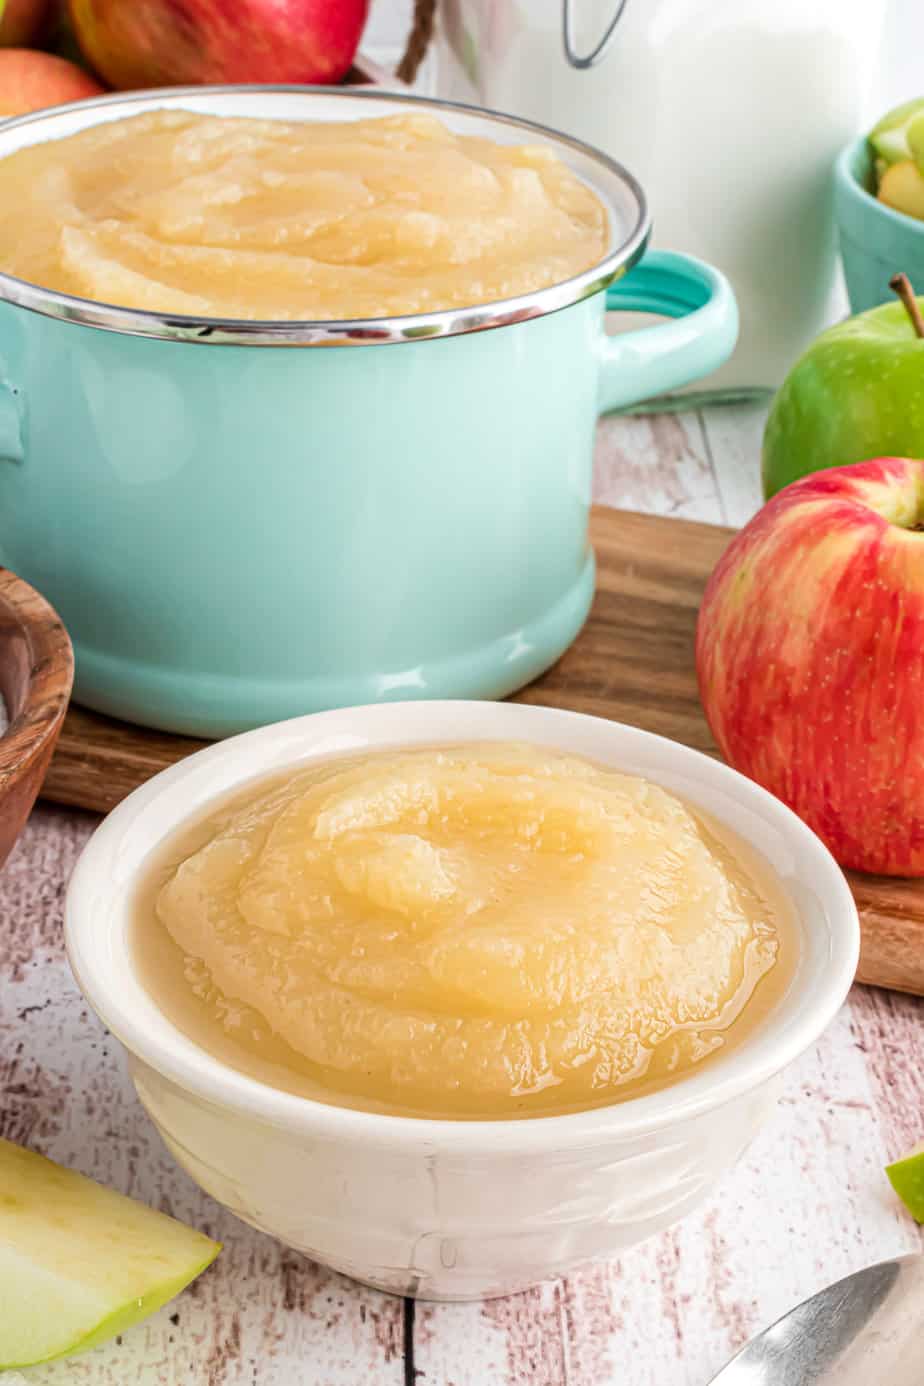 Applesauce in a bowl from the side with a fresh apple and a pot full of applesauce in the background.